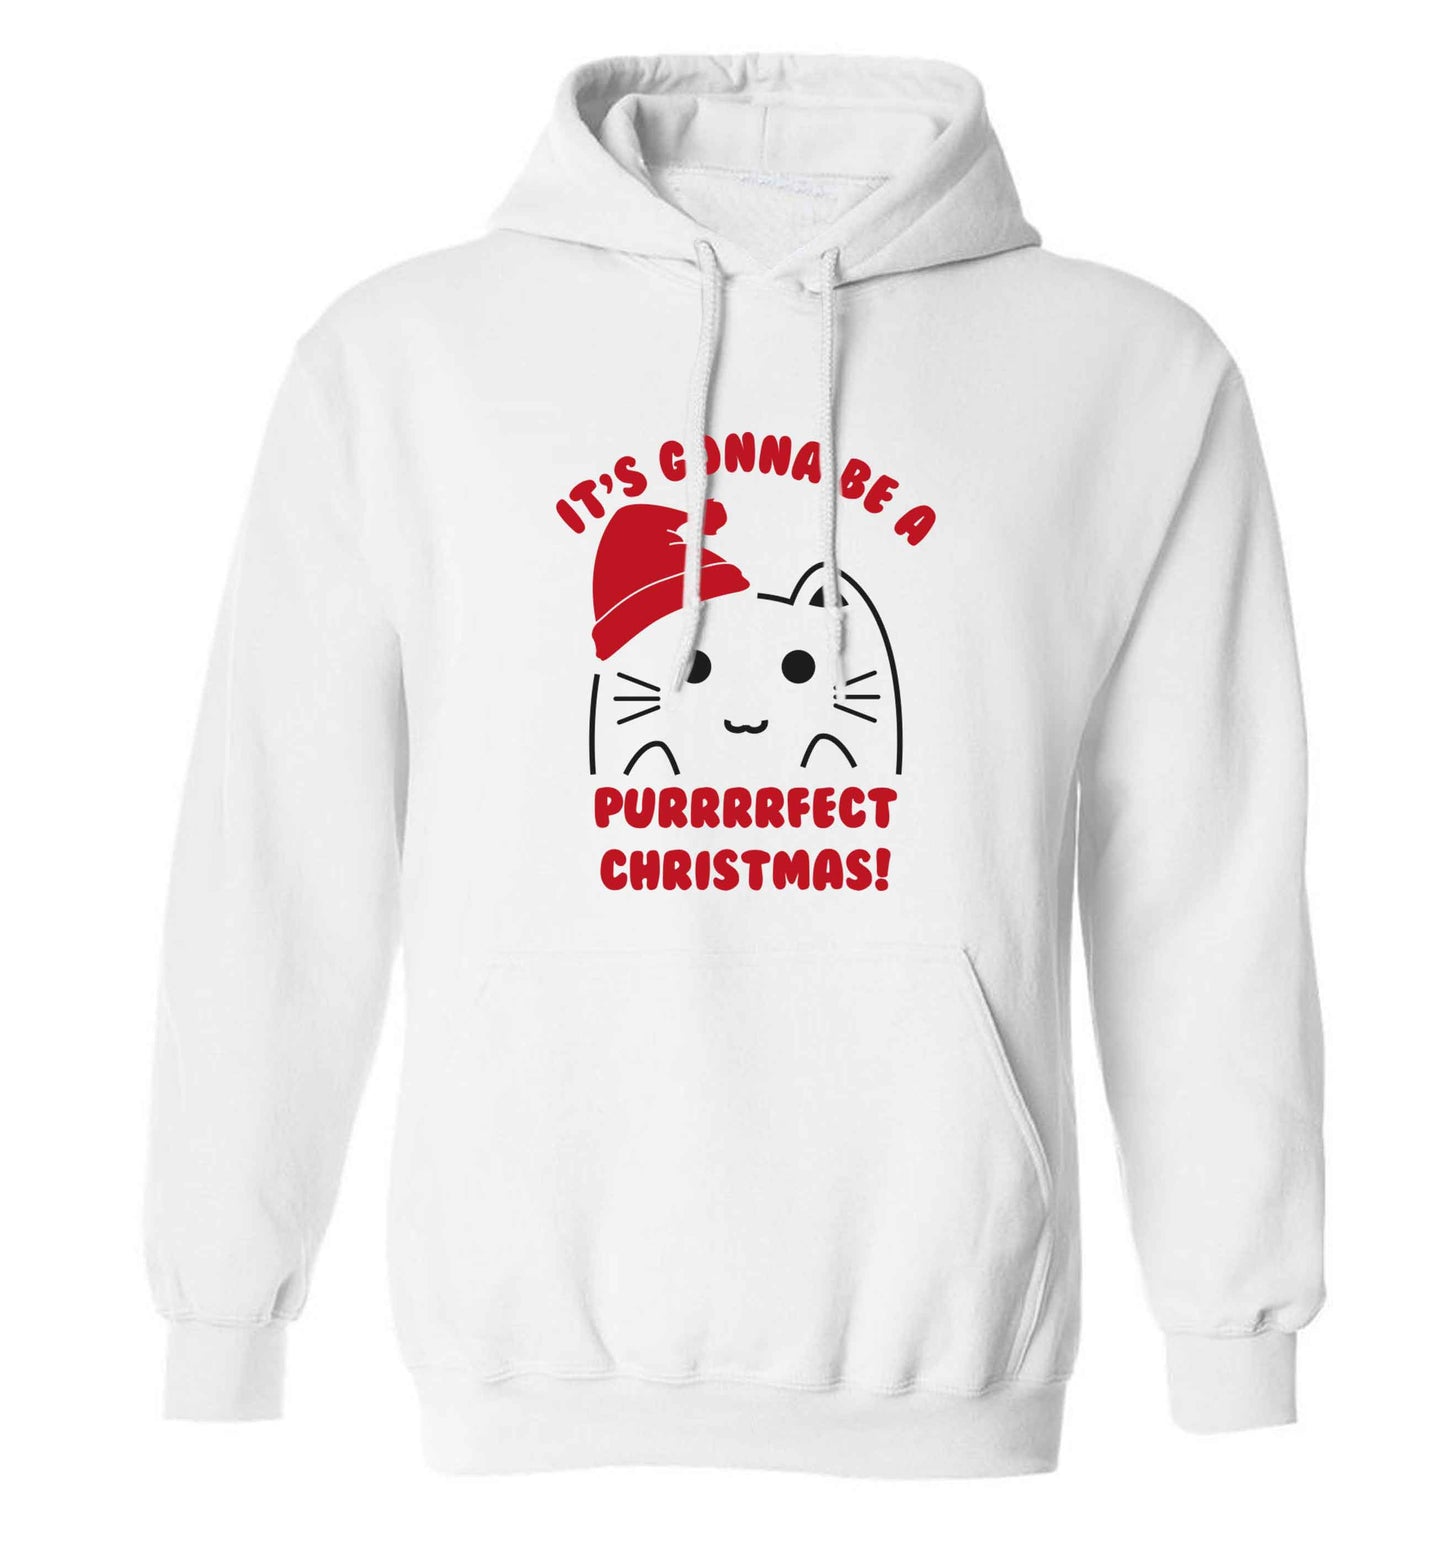 It's going to be a purrfect Christmas adults unisex white hoodie 2XL